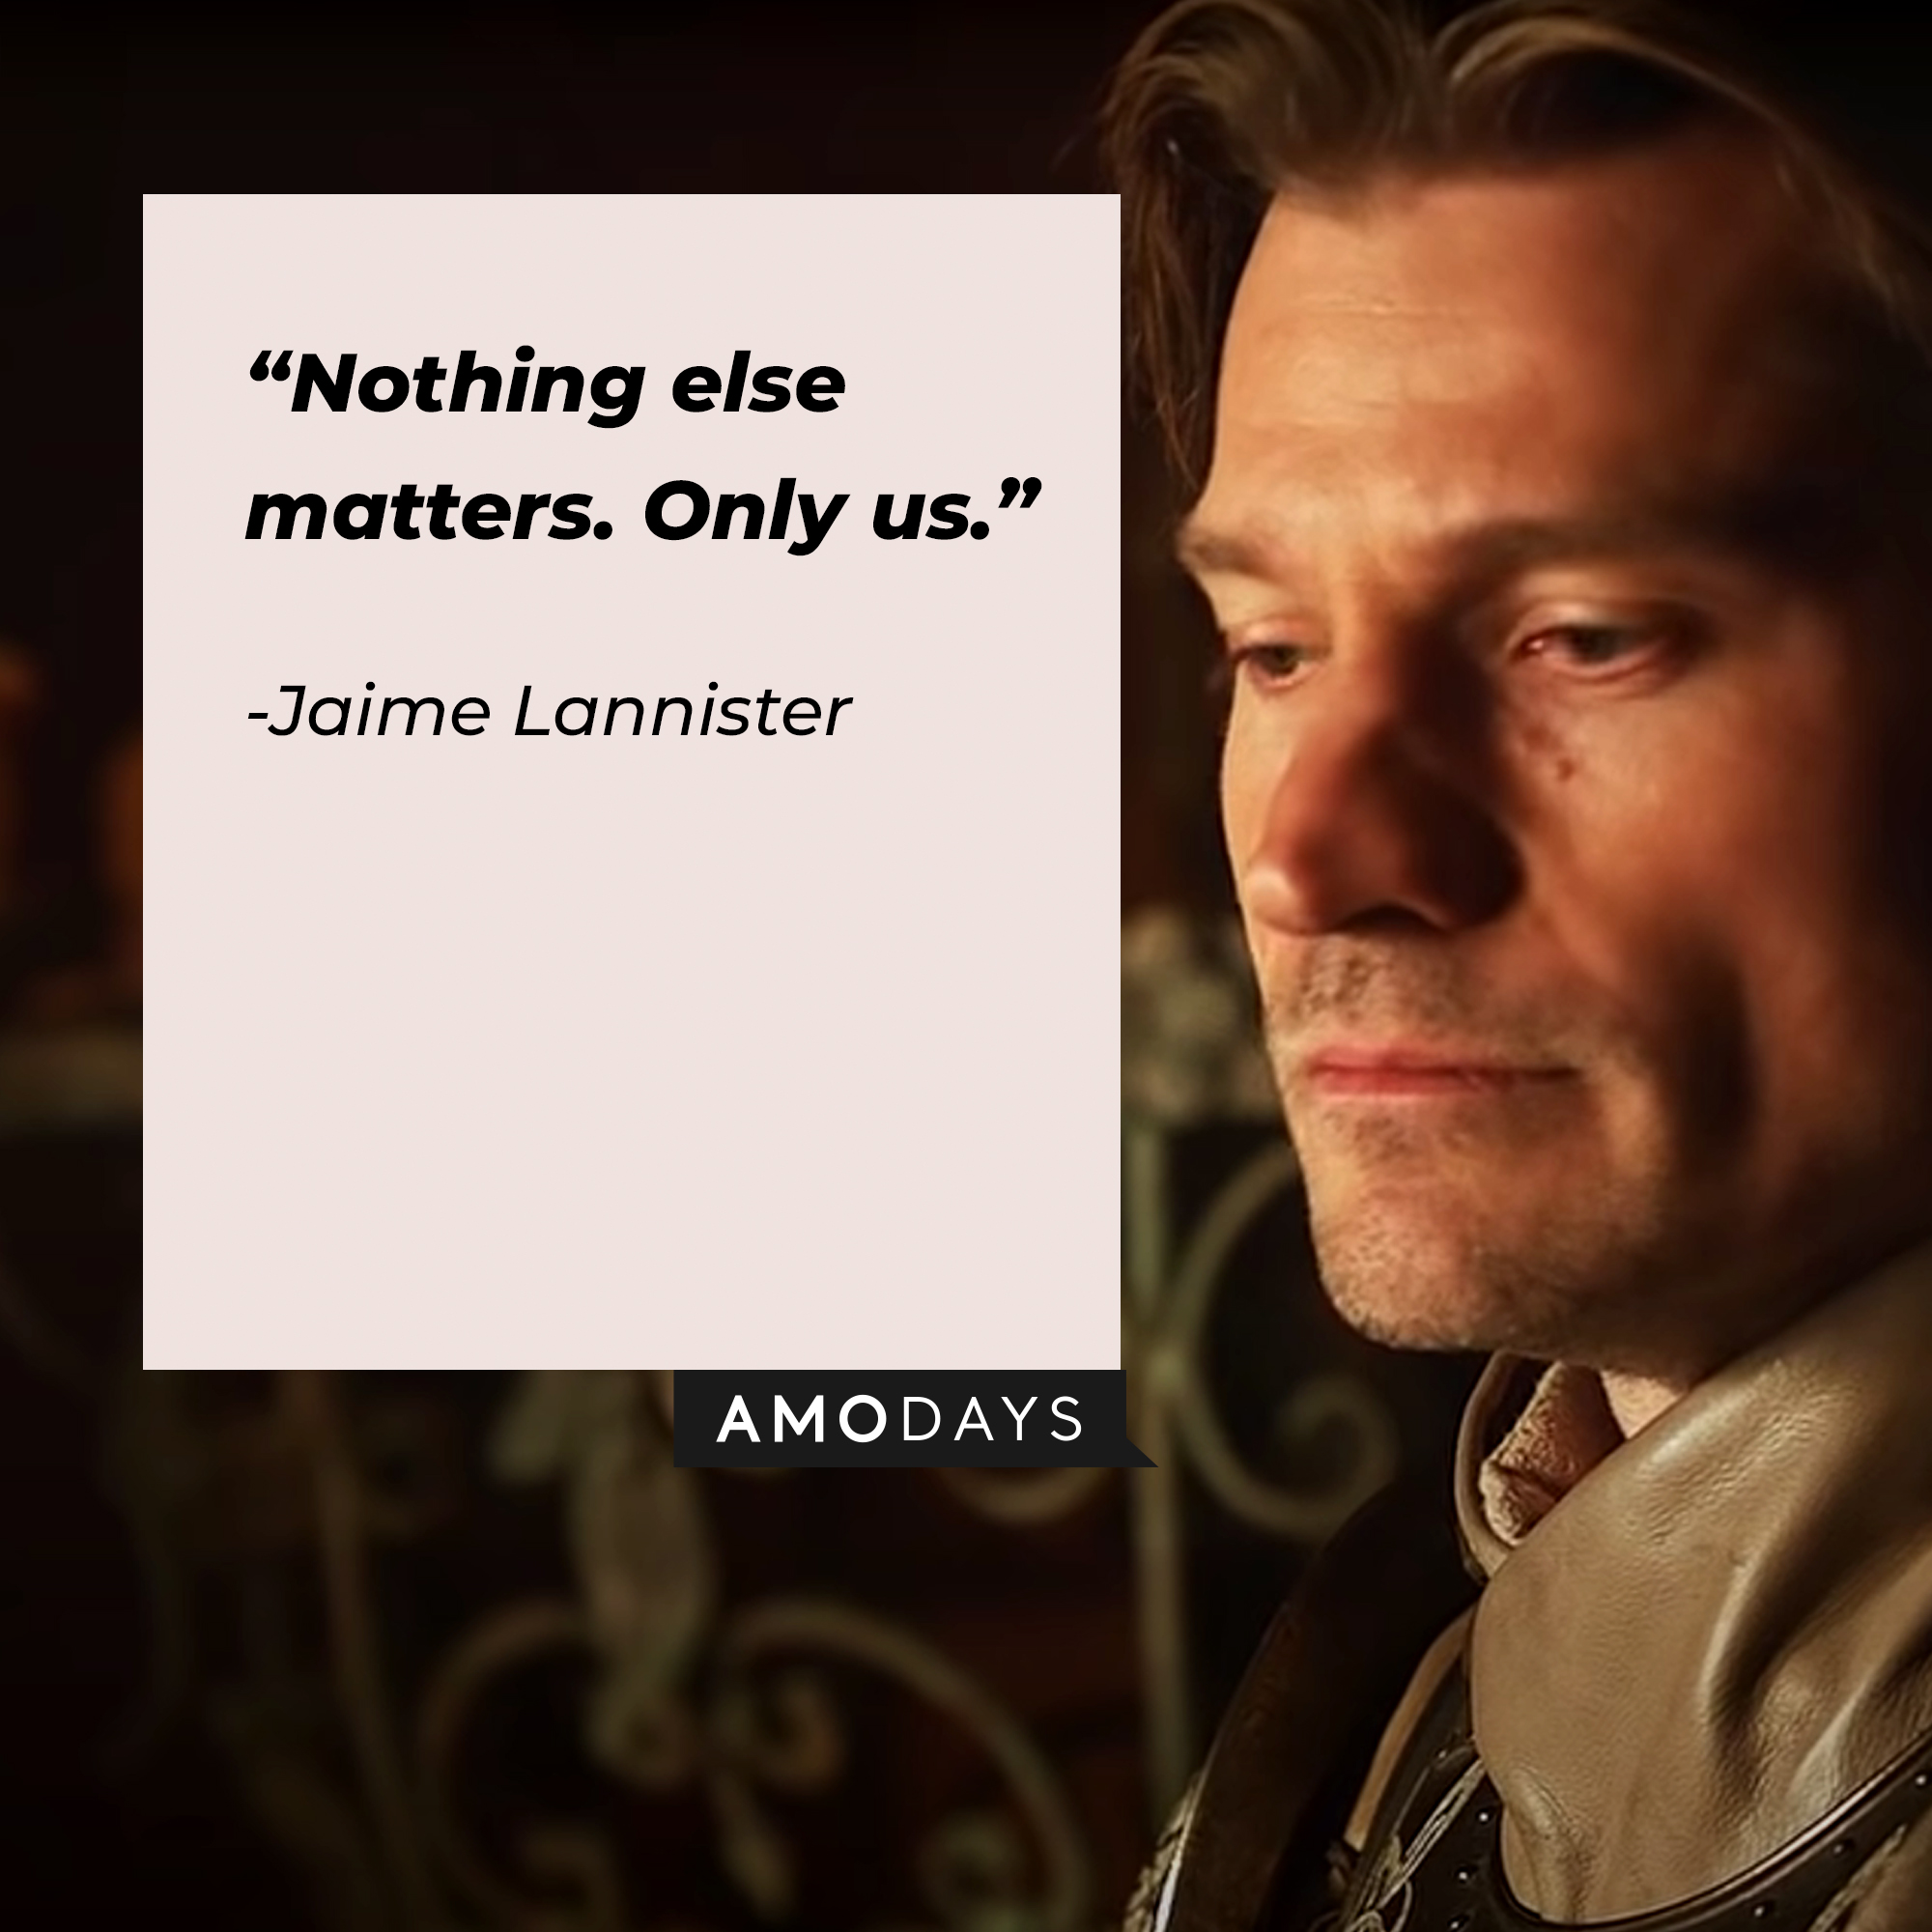 An image of Jaime Lannister, played by Nikolaj Coster-Waldau, with his quote: “Nothing else matters. Only us." | Source: facebook.com/Game of Thrones